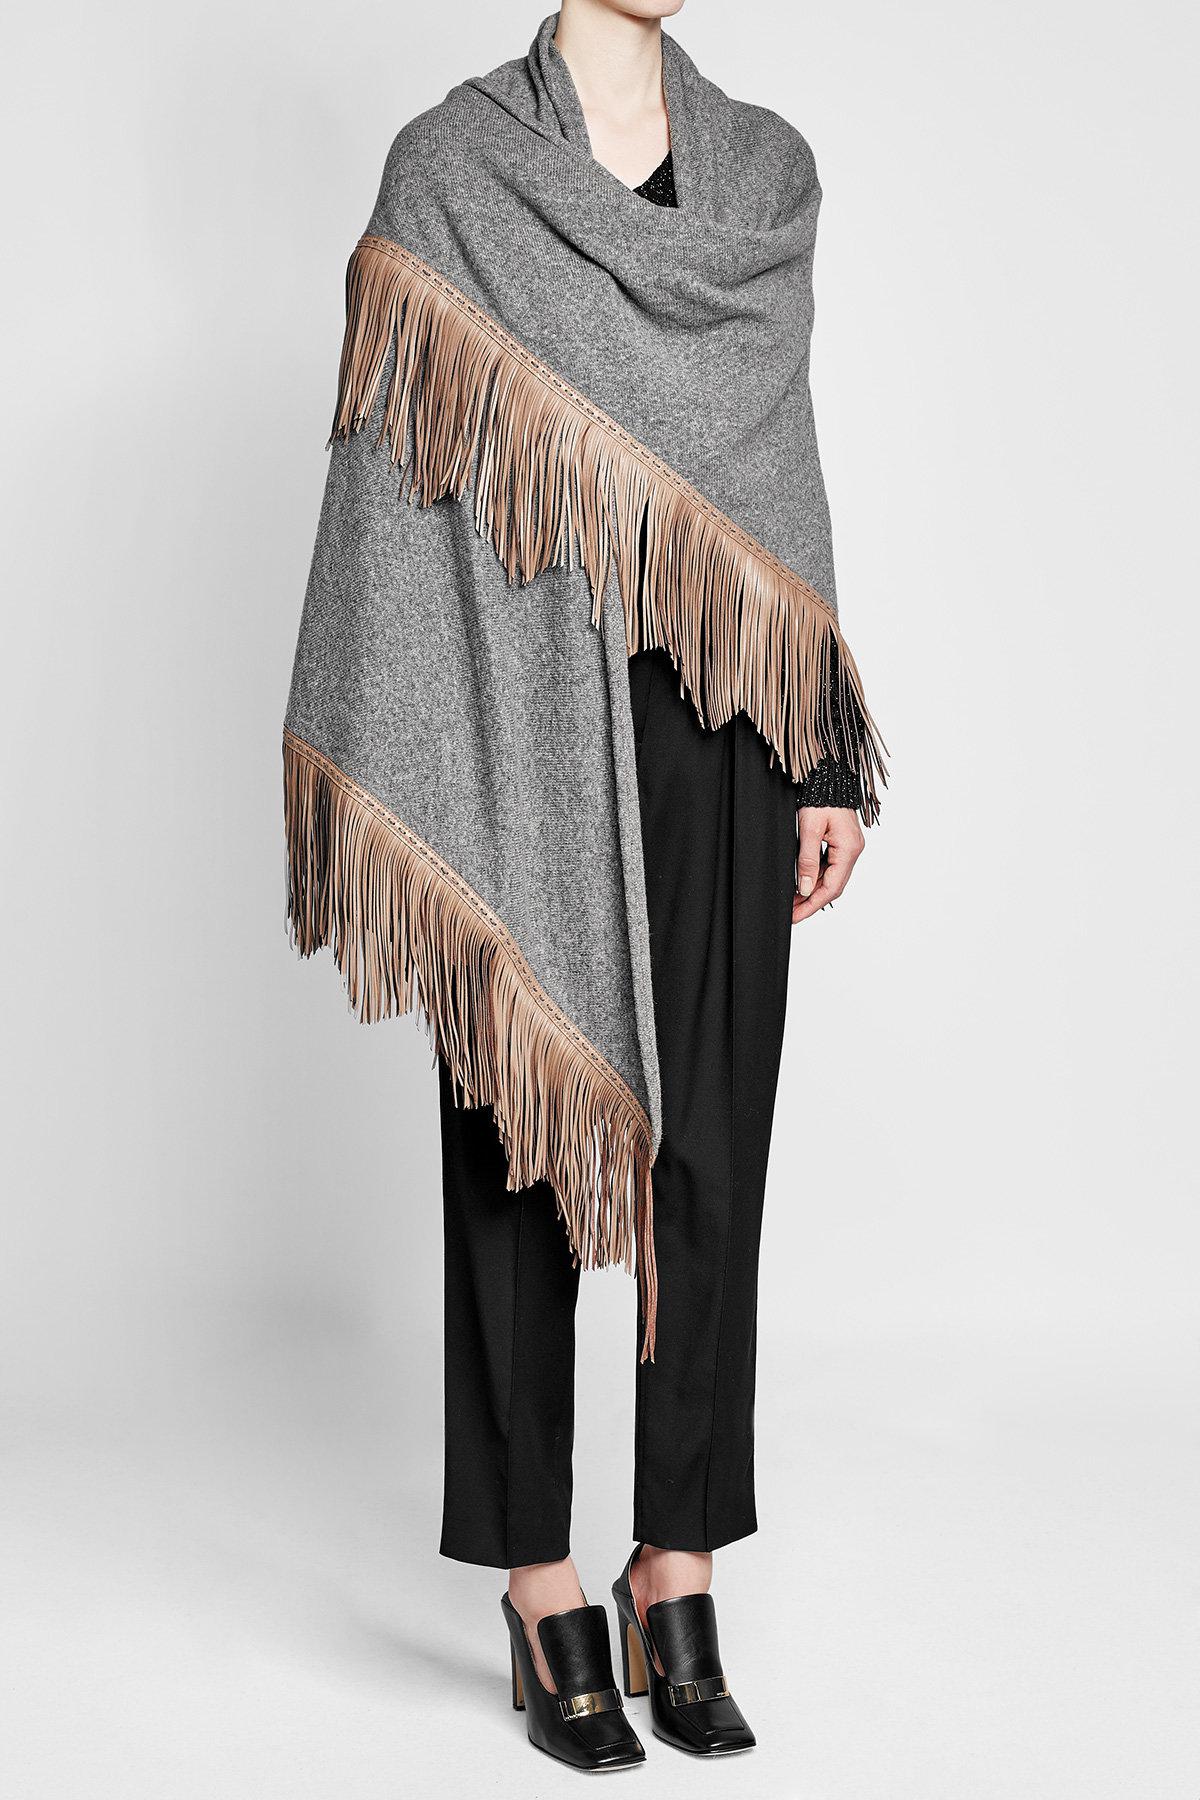 Lyst - Agnona Fringed Cape With Wool And Camel Hair in Gray